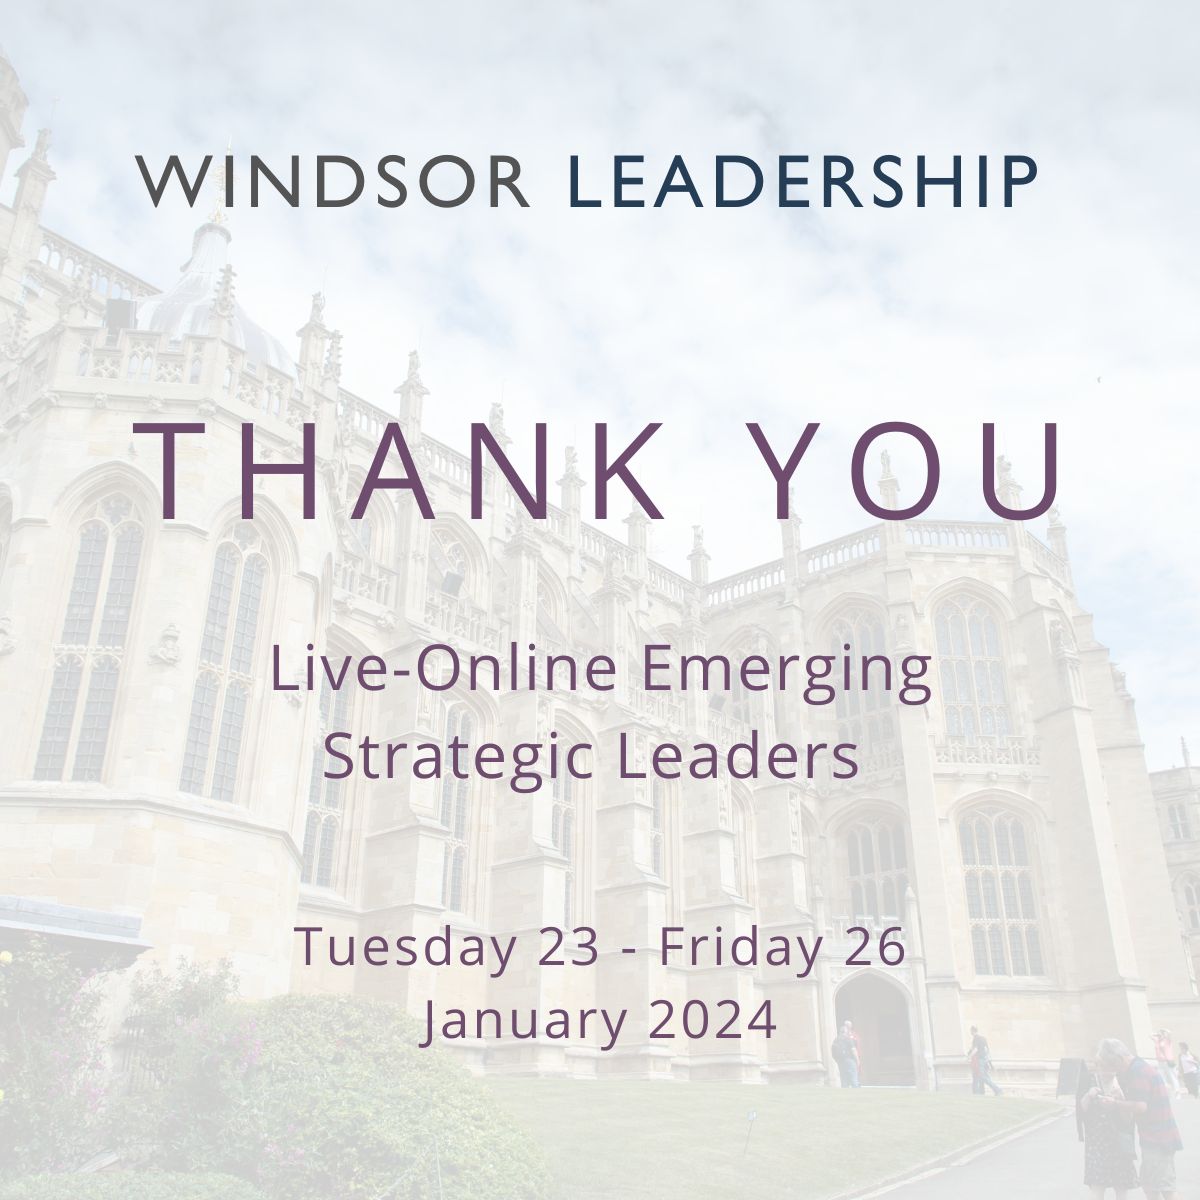 Thank you to those who joined us for our Live Online Emerging Strategic Leaders programme this week. We look forward to welcoming you back to your Part Two later in the year. #thankyou #onlineprogrammes #leadership